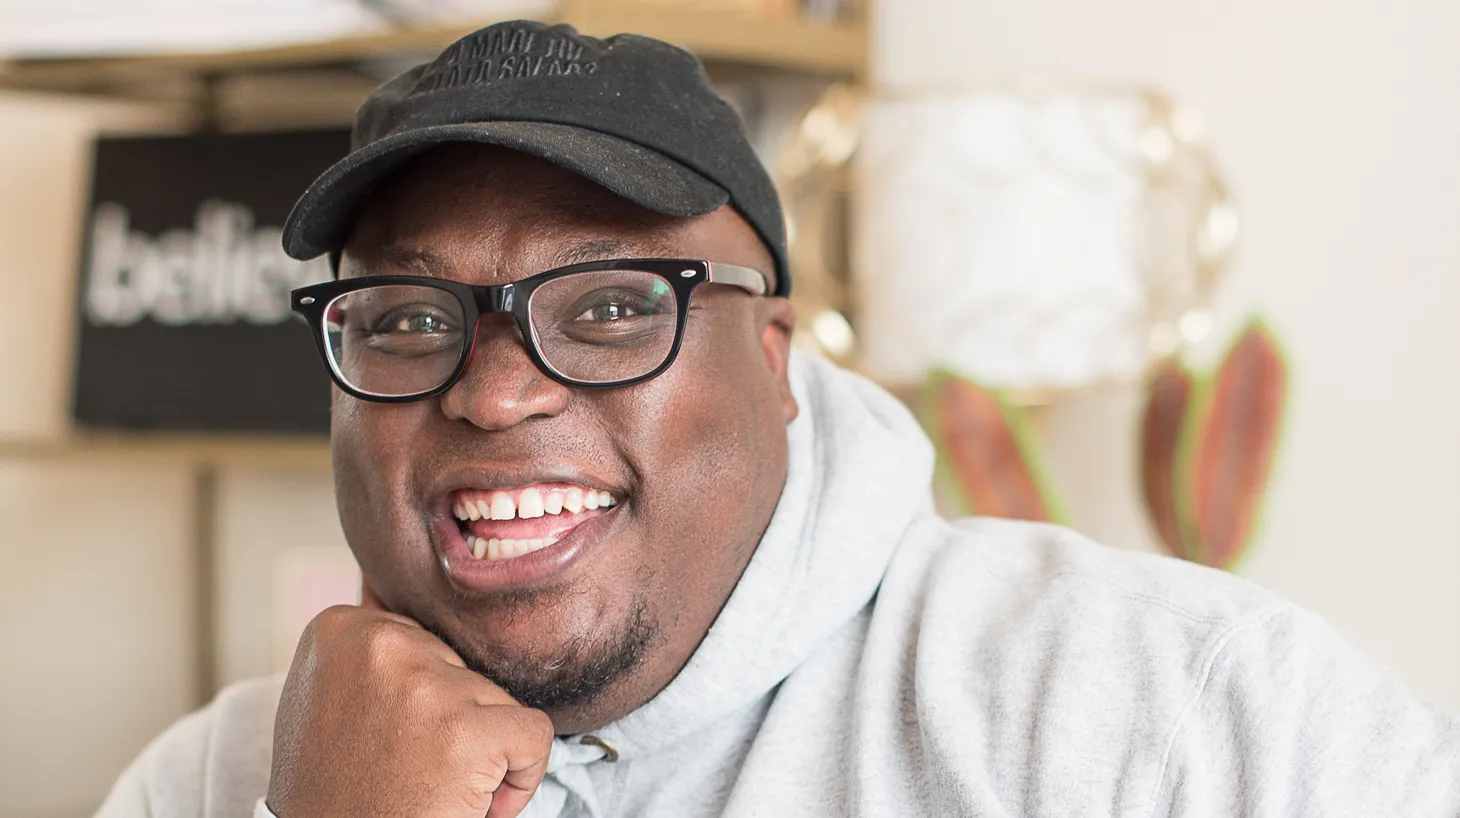 Historian and content creator KJ Kearney grew up in the Gullah-Geechee corridor of Charletson but says he didn’t realize how special his heritage was until he learned its history in college.